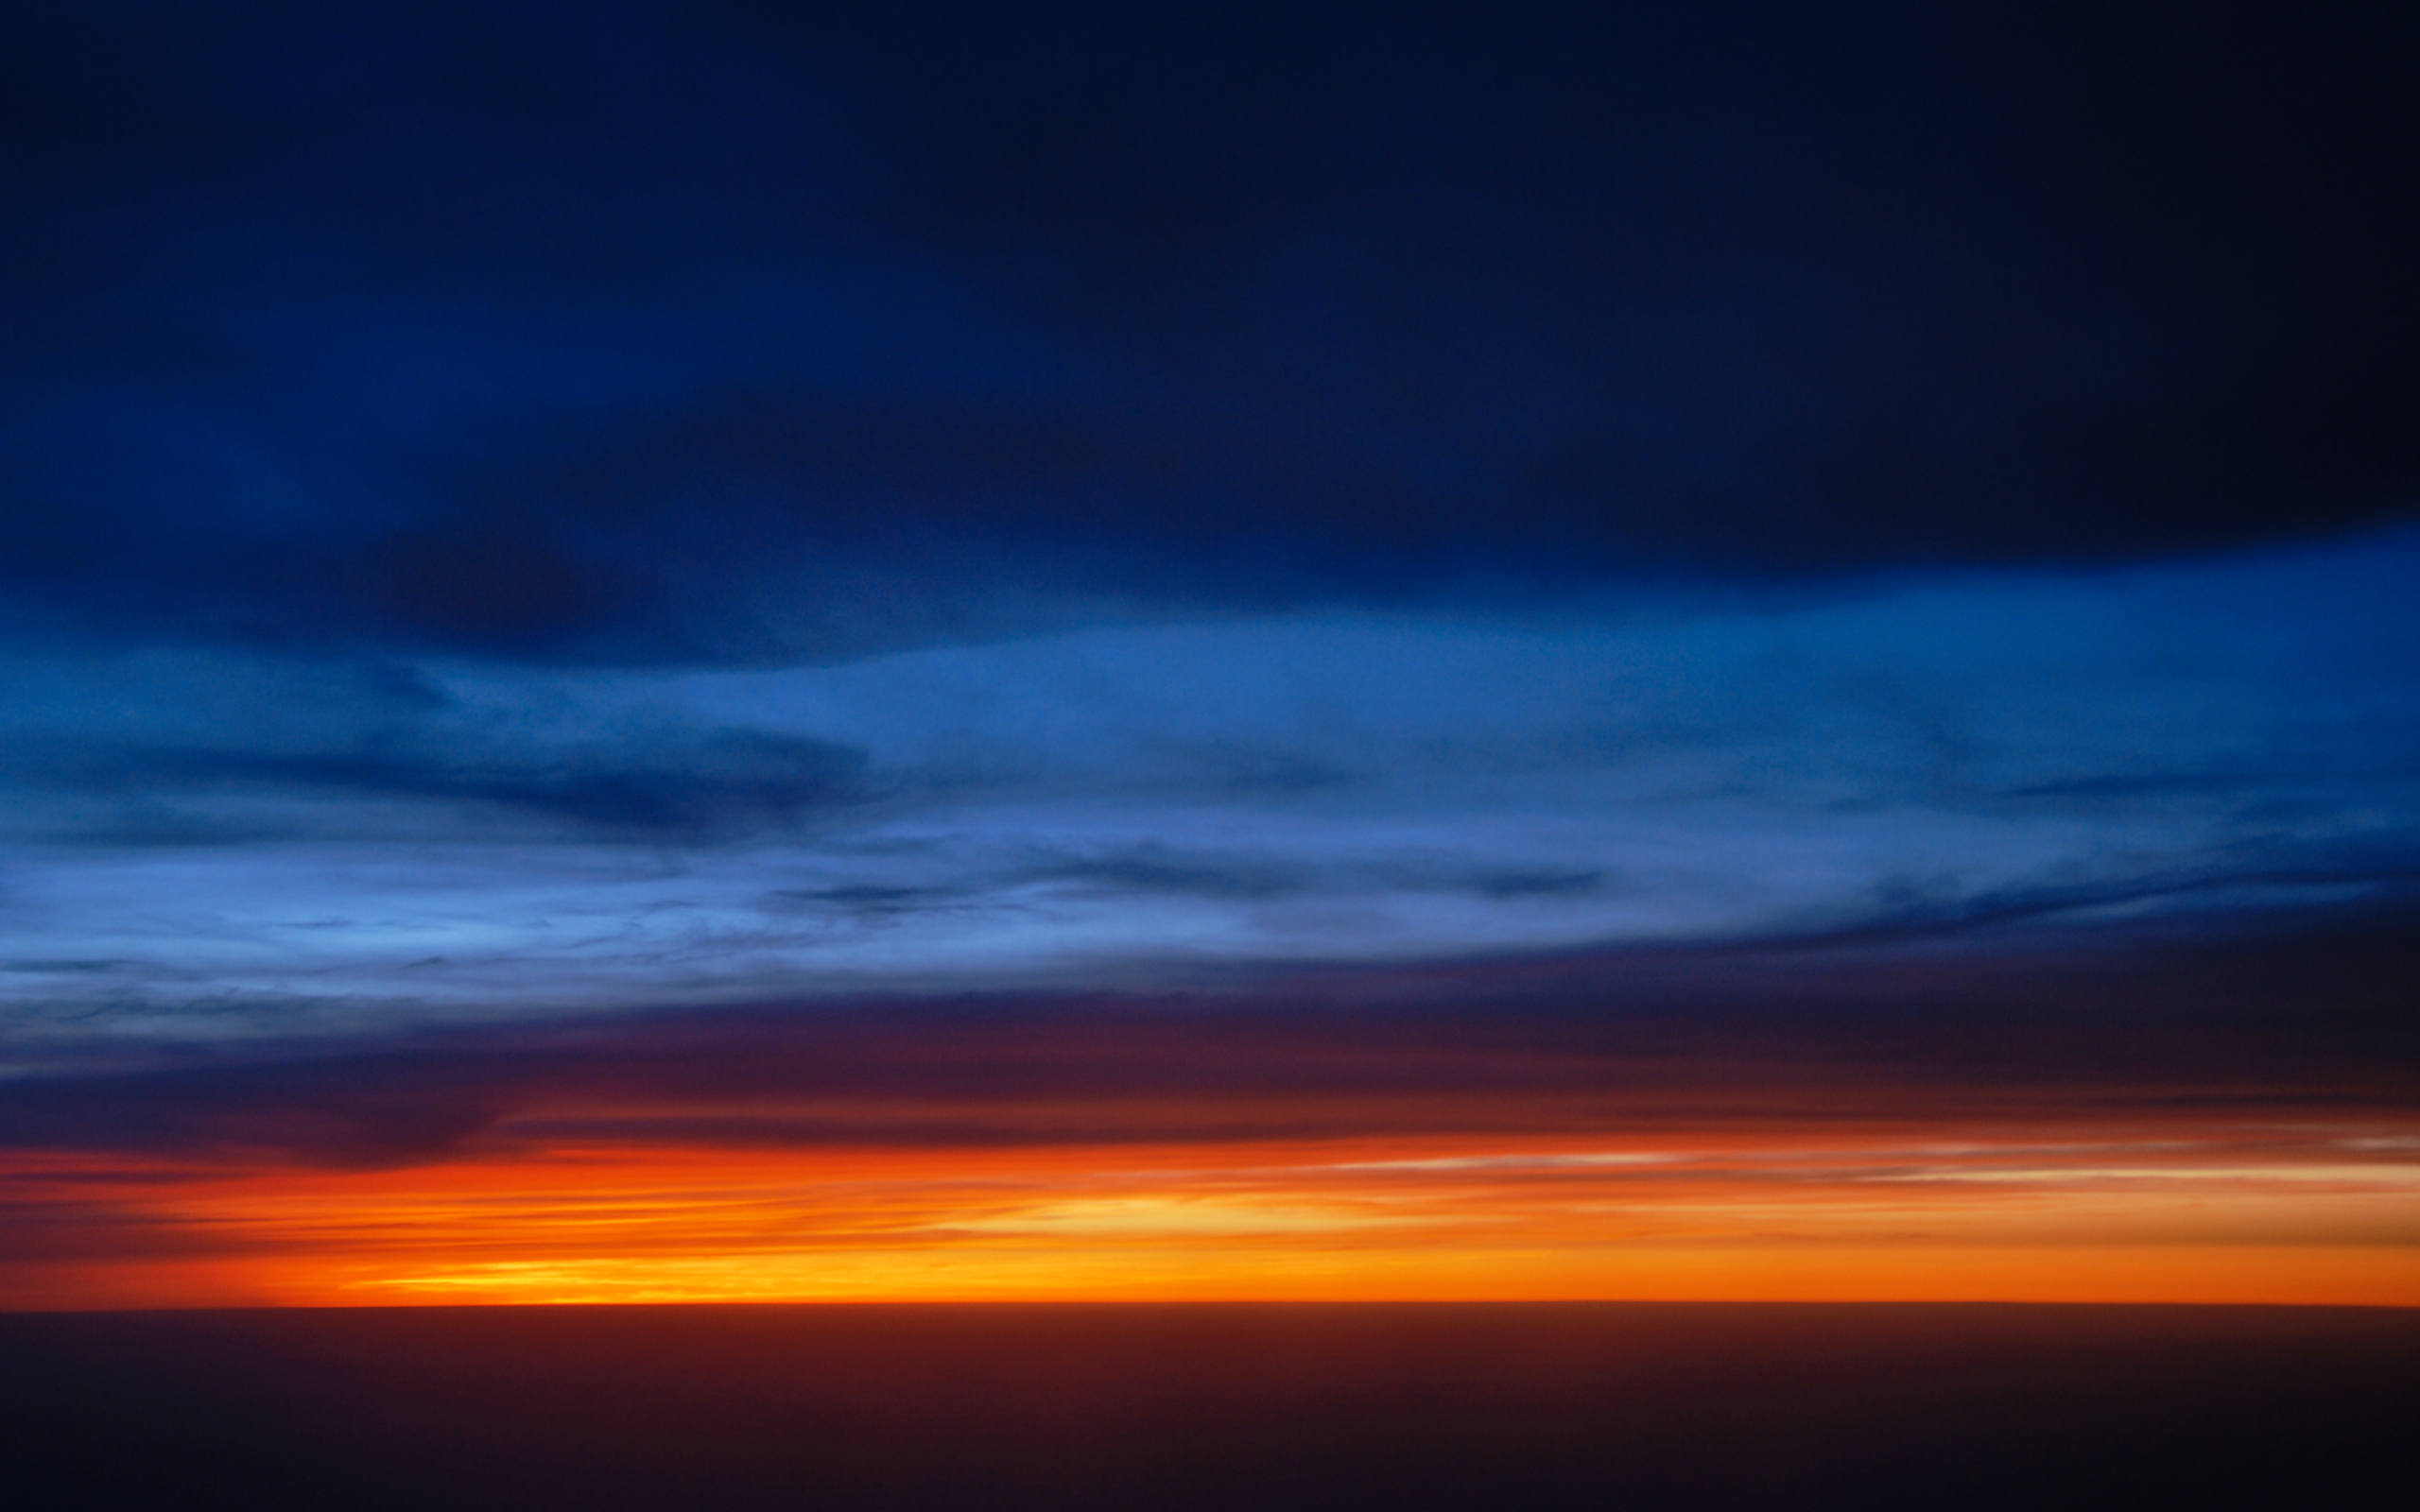 Hq Sunset Over The Clouds Wallpaper